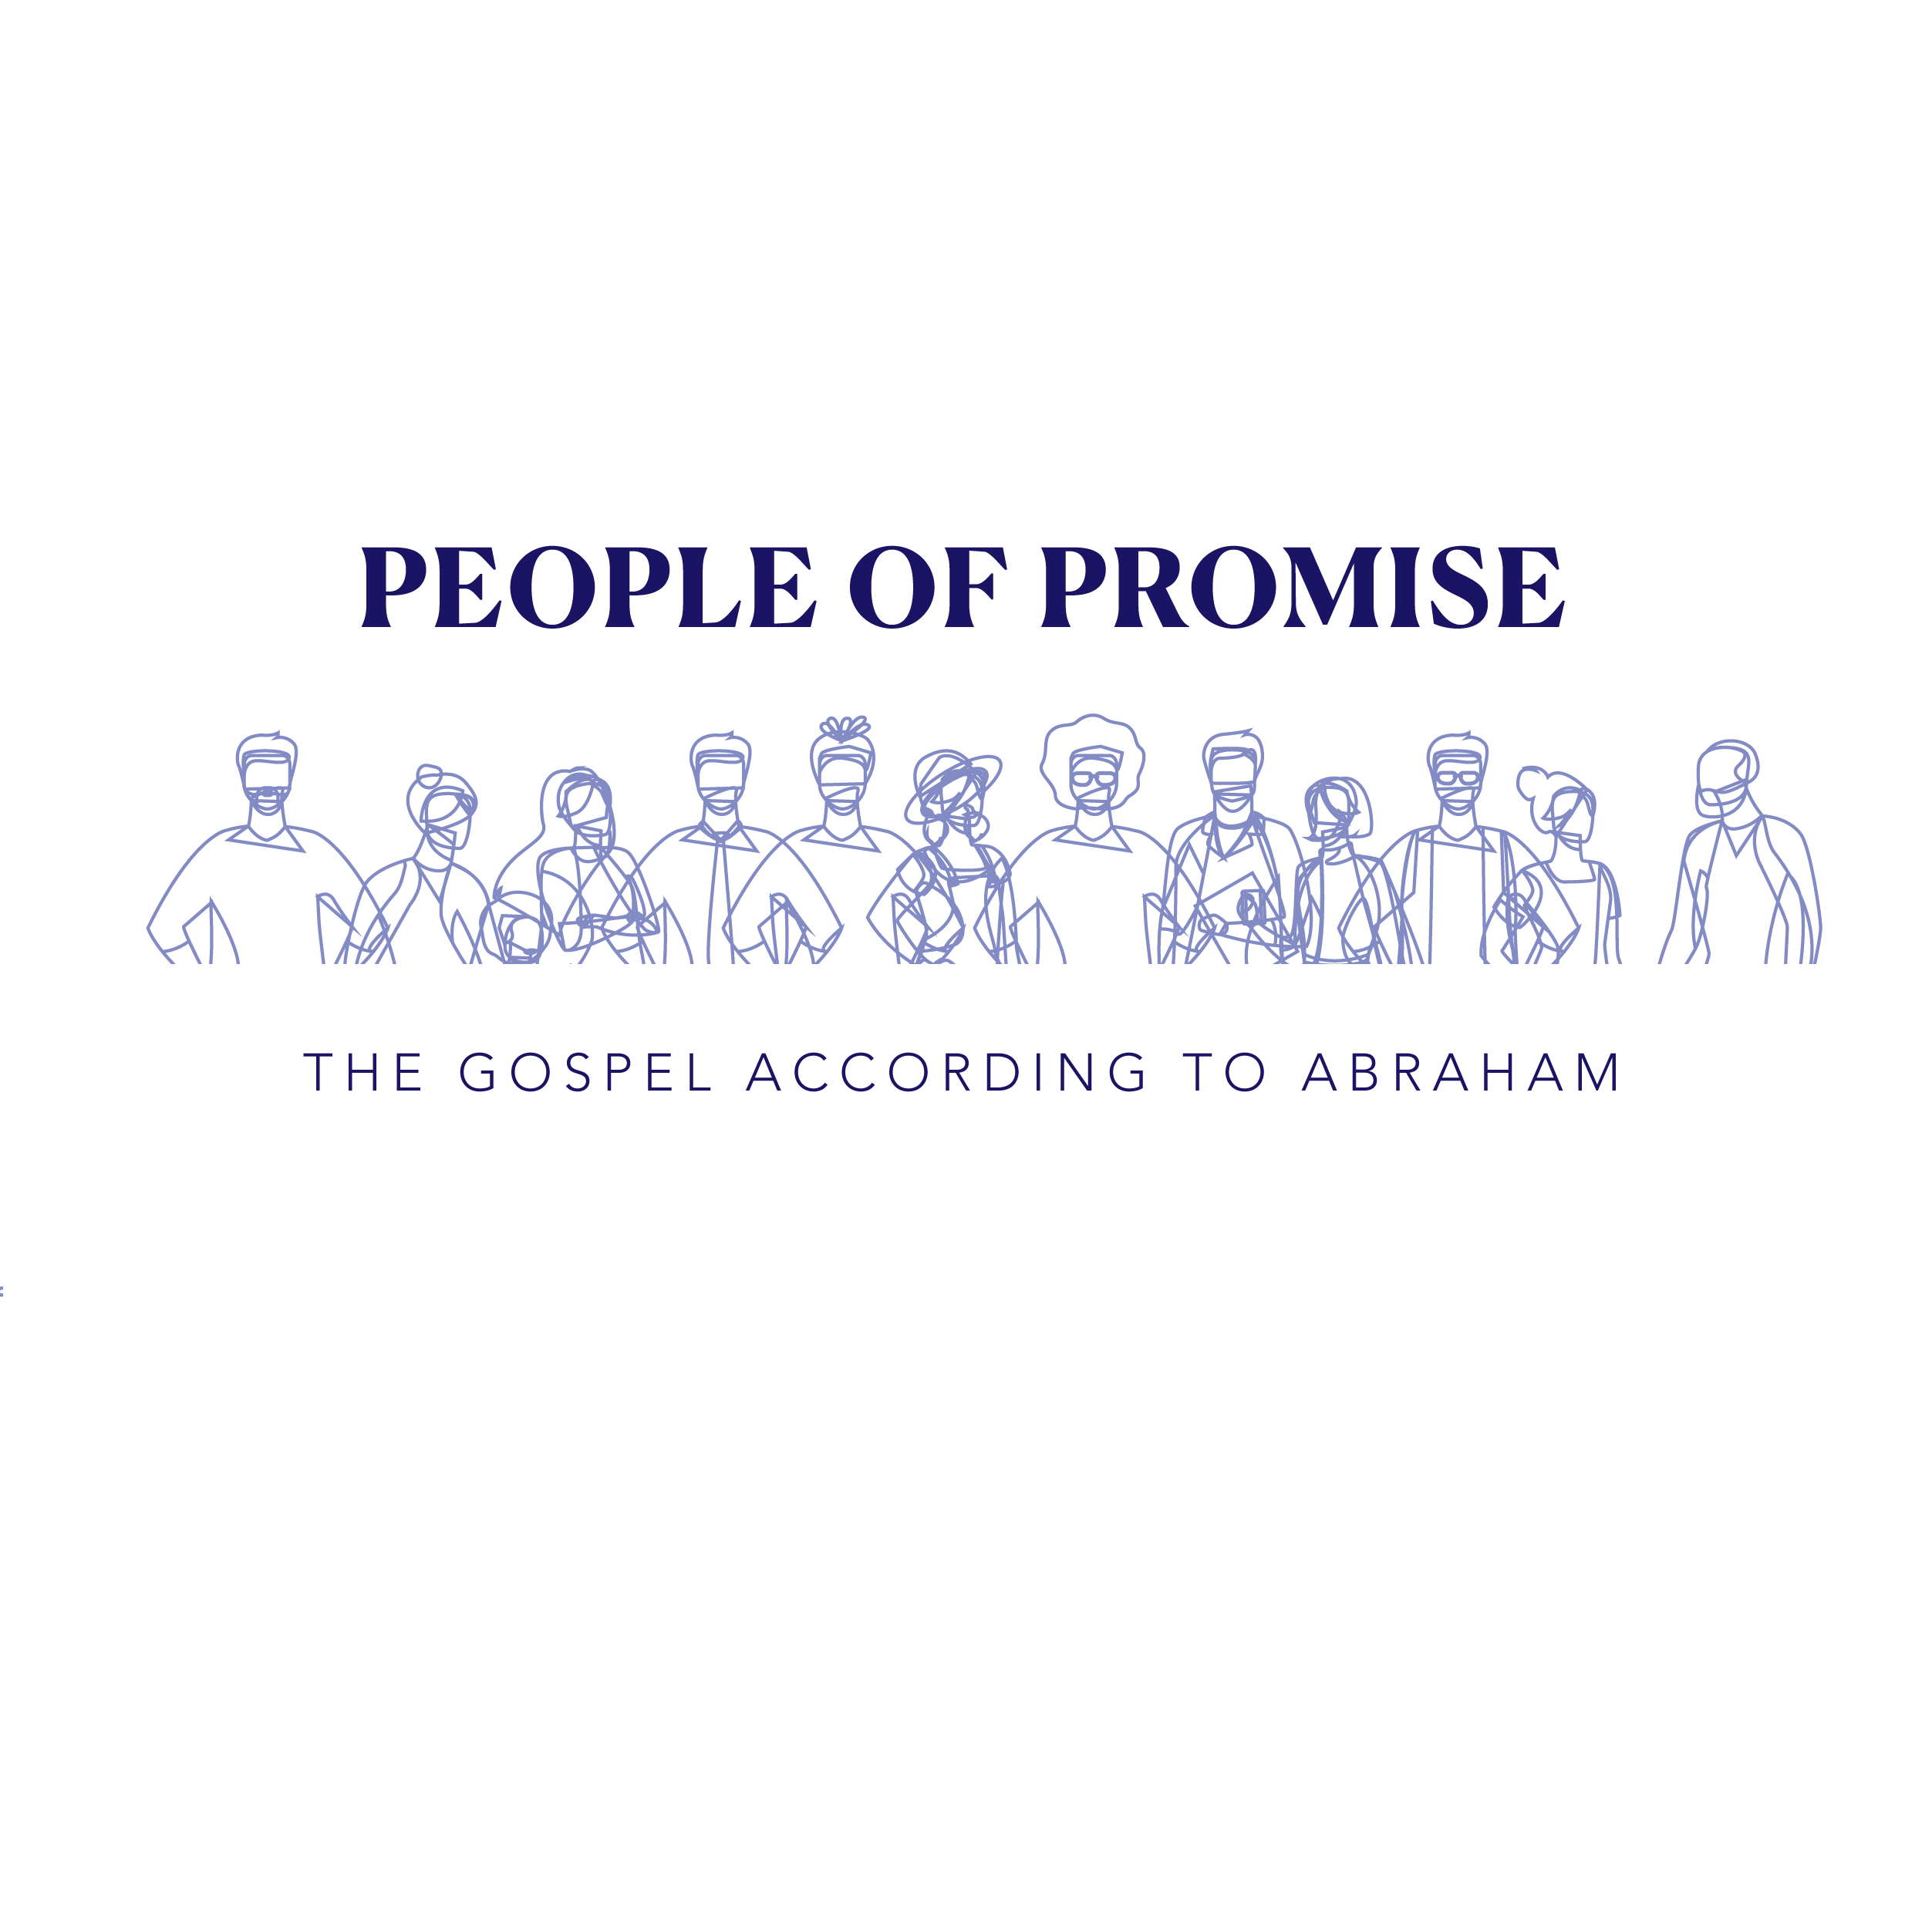 People of Promise: Abraham’s Circumcision